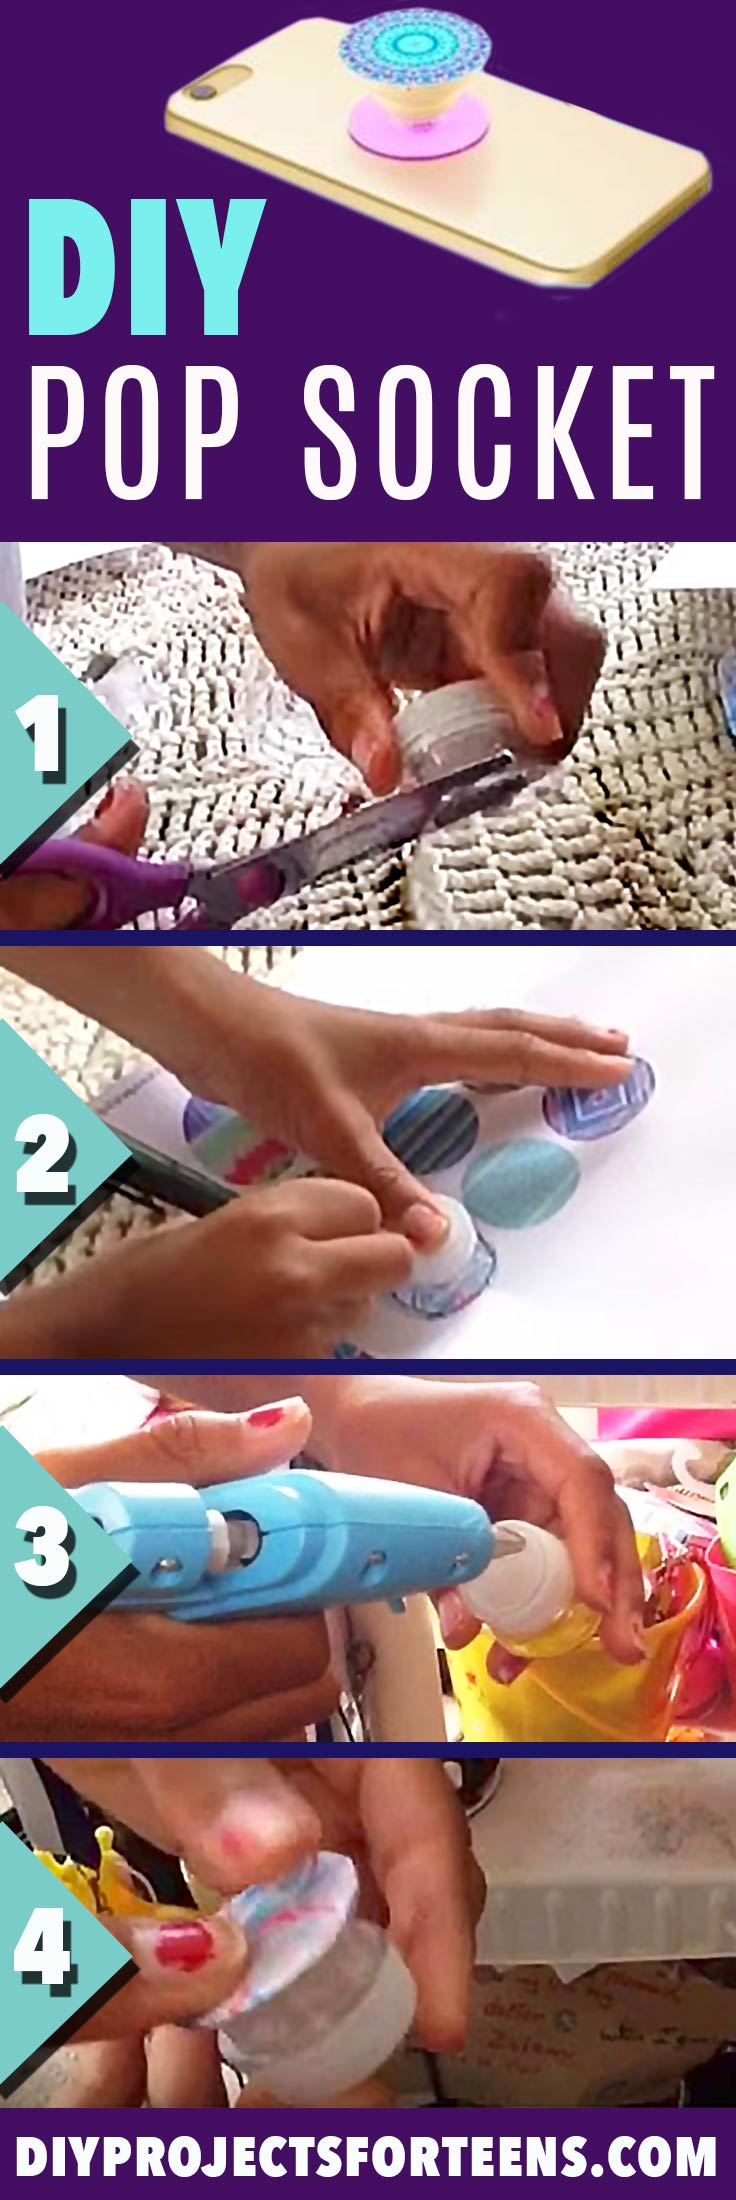 DIY Pop Socket Tutorial and Video - Cool Crafts and DIY Projects for Teens - Easy Craft Ideas for Teenagers - Cheap Phone Accessories, Hacks and Gadgets - Fun Ideas for Teens and Kids To Make This Summer - Step by Step Tutorial and Instructions